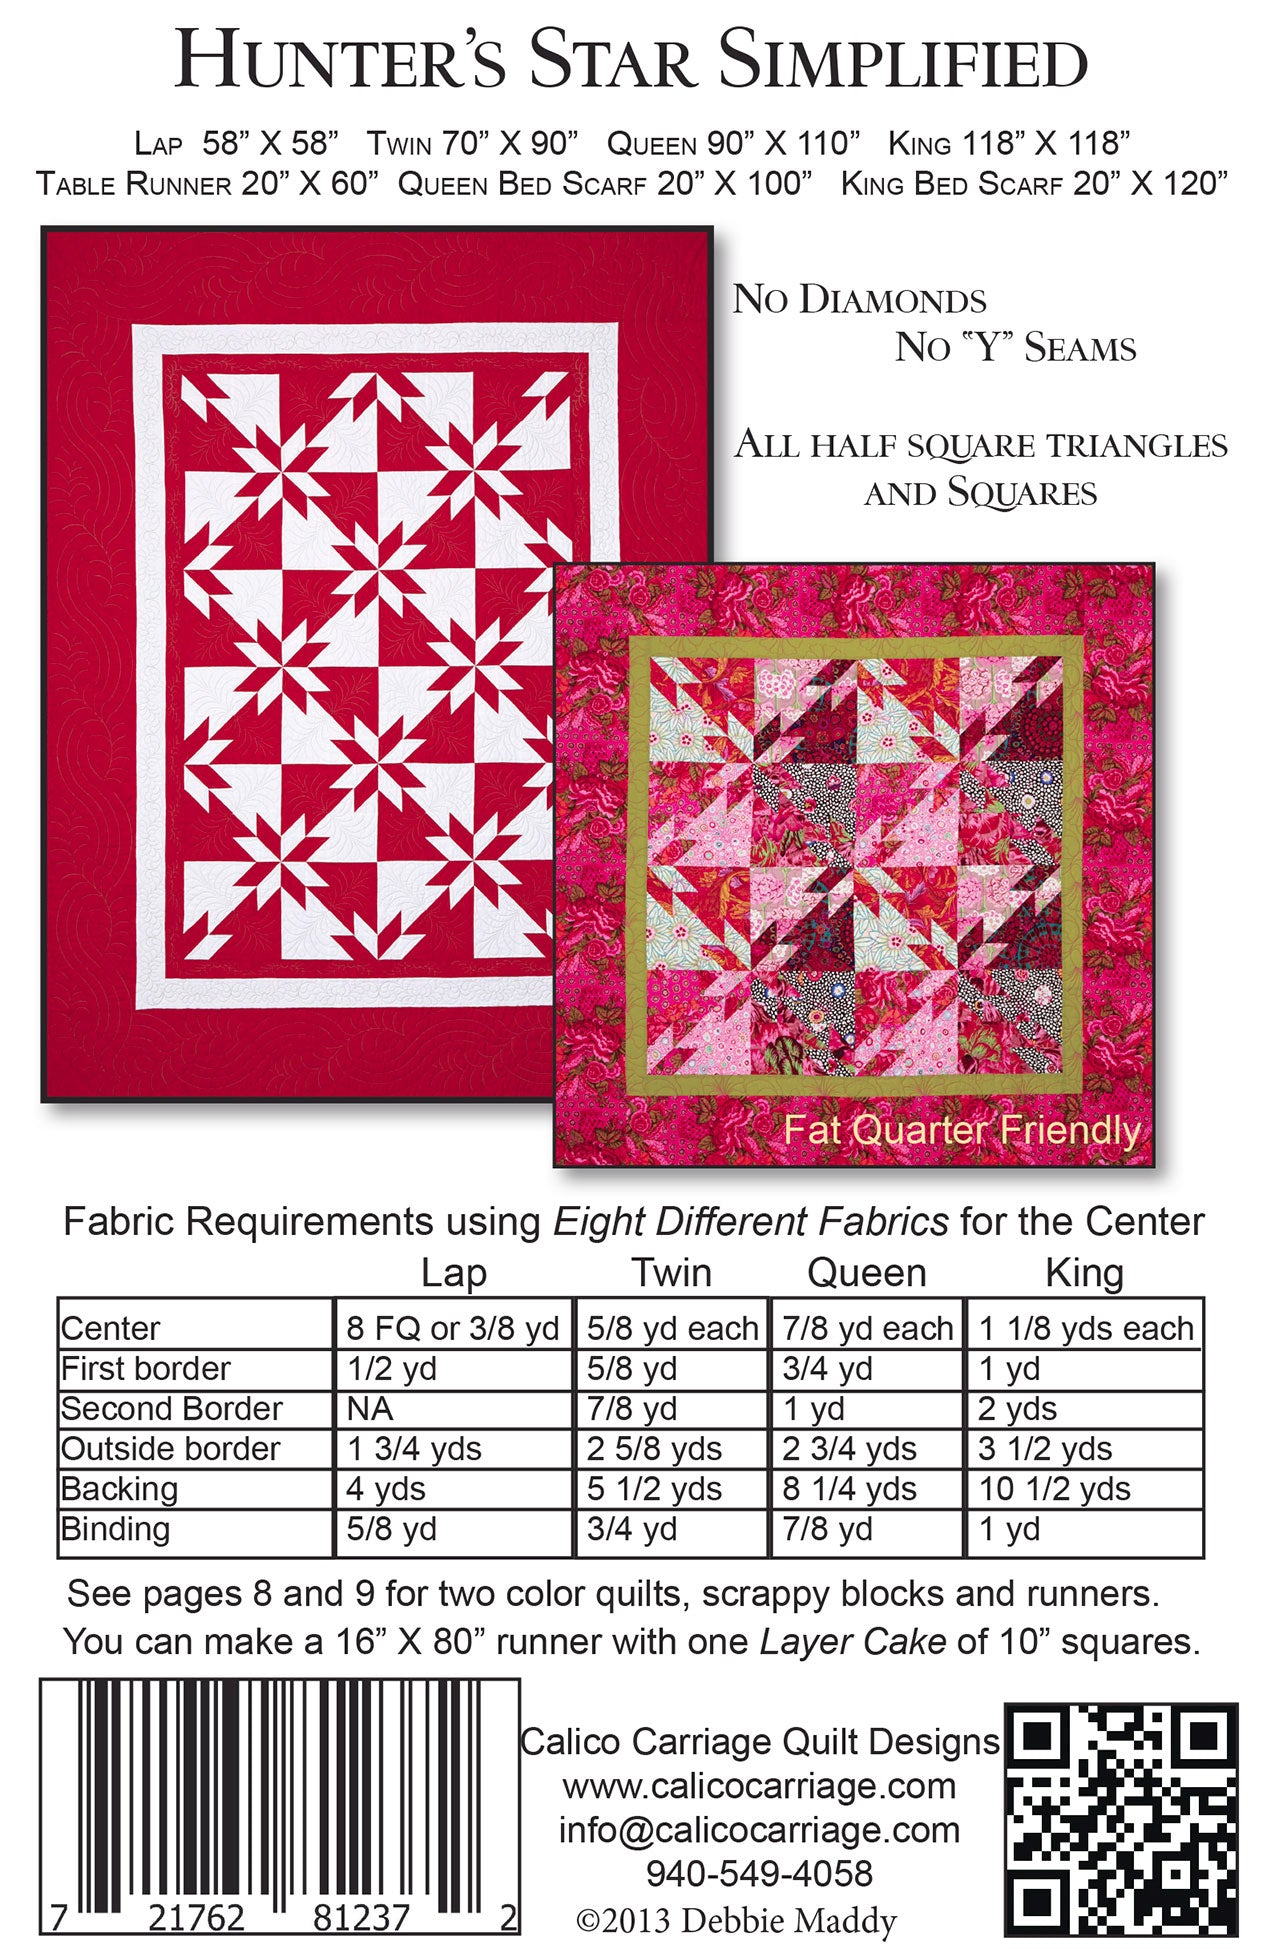 Hunter's Star Simplified Quilt Pattern by Debbie Maddy for Calico Carriage Quilt Designs